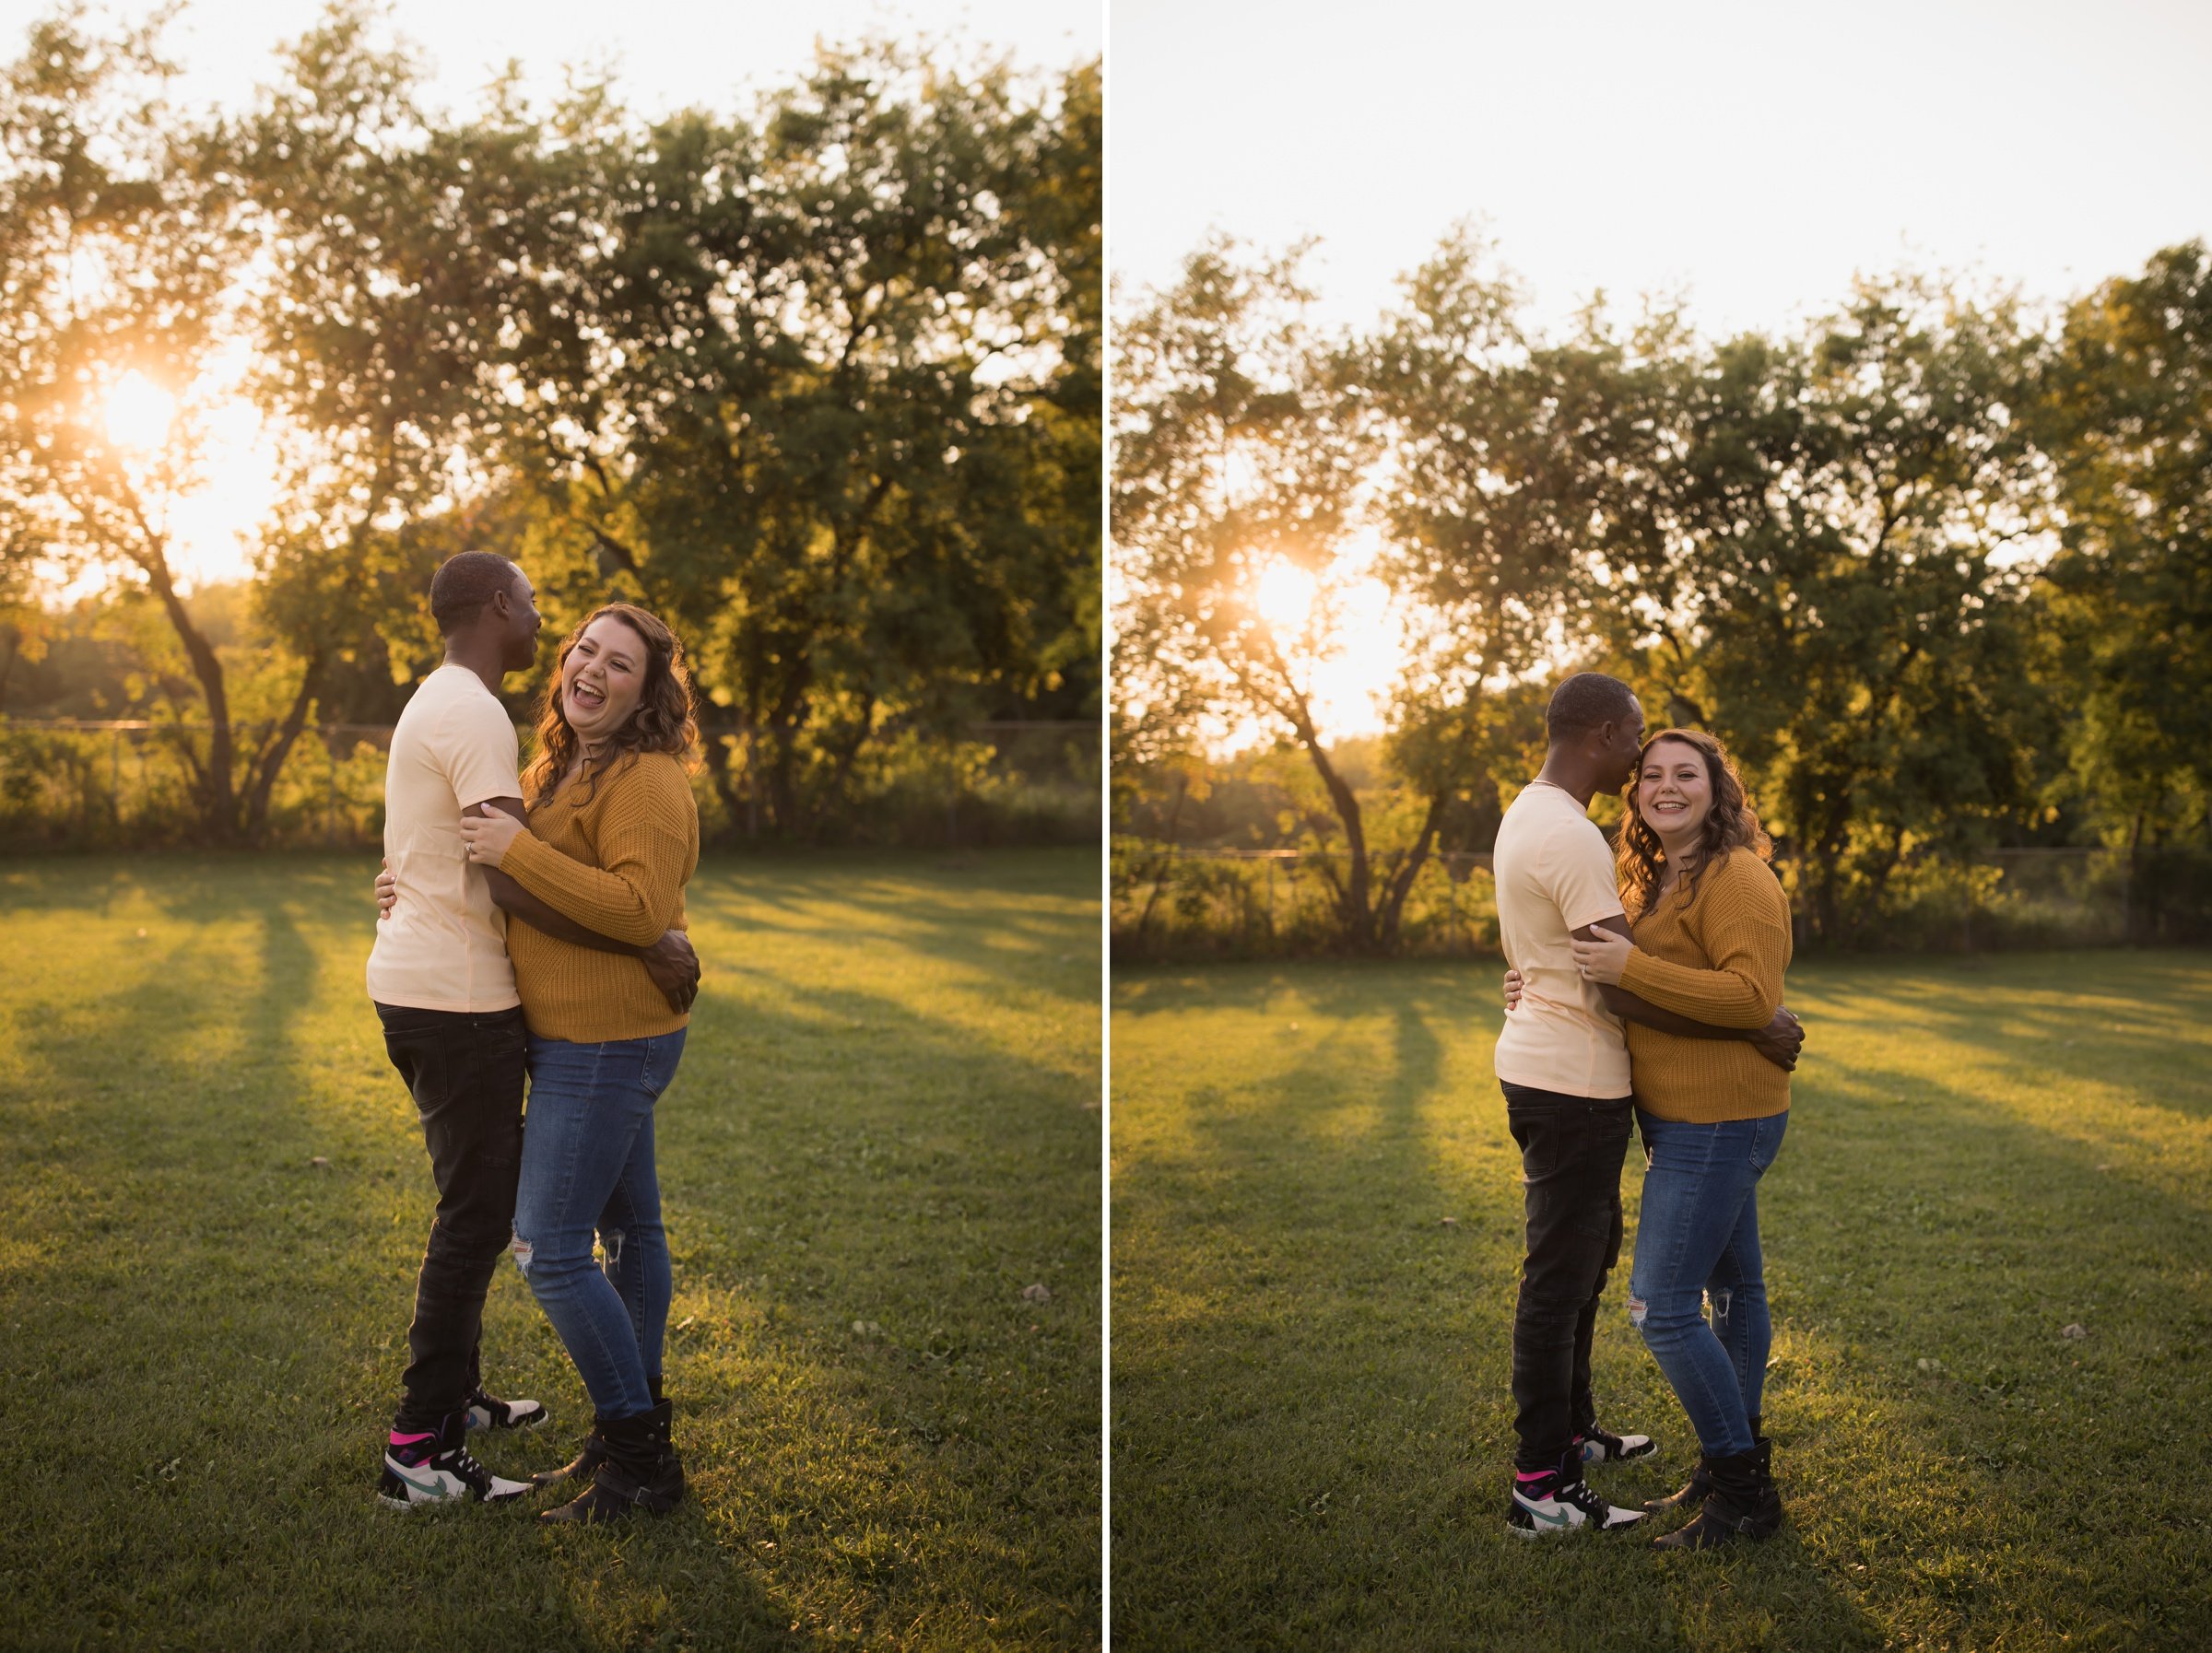 Jessica and Paul - A Sunset Bay Shore Park Engagement Session36.jpg